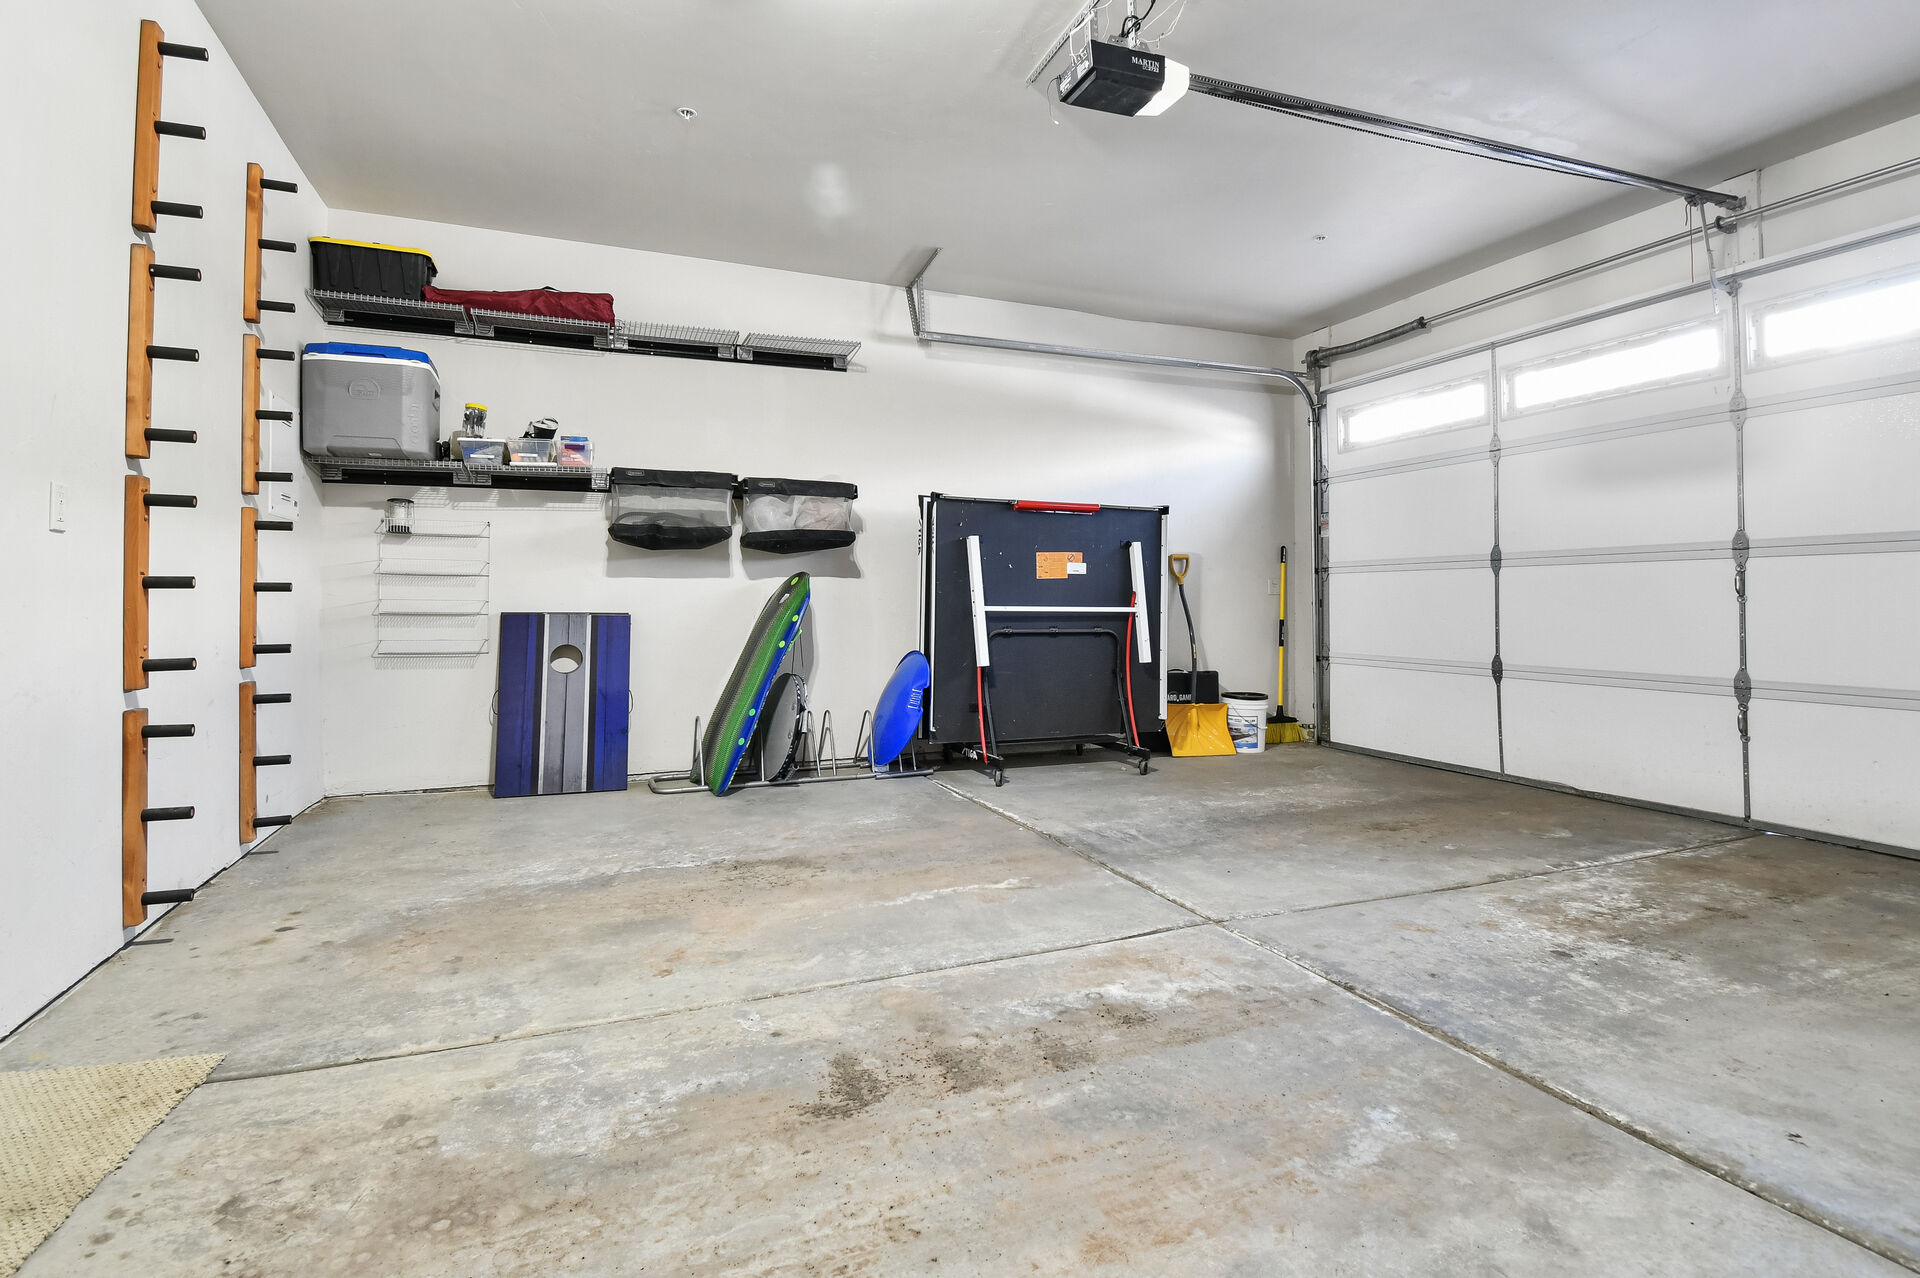 Large 2 car garage with Ping Pong table, dart board, and ski rack